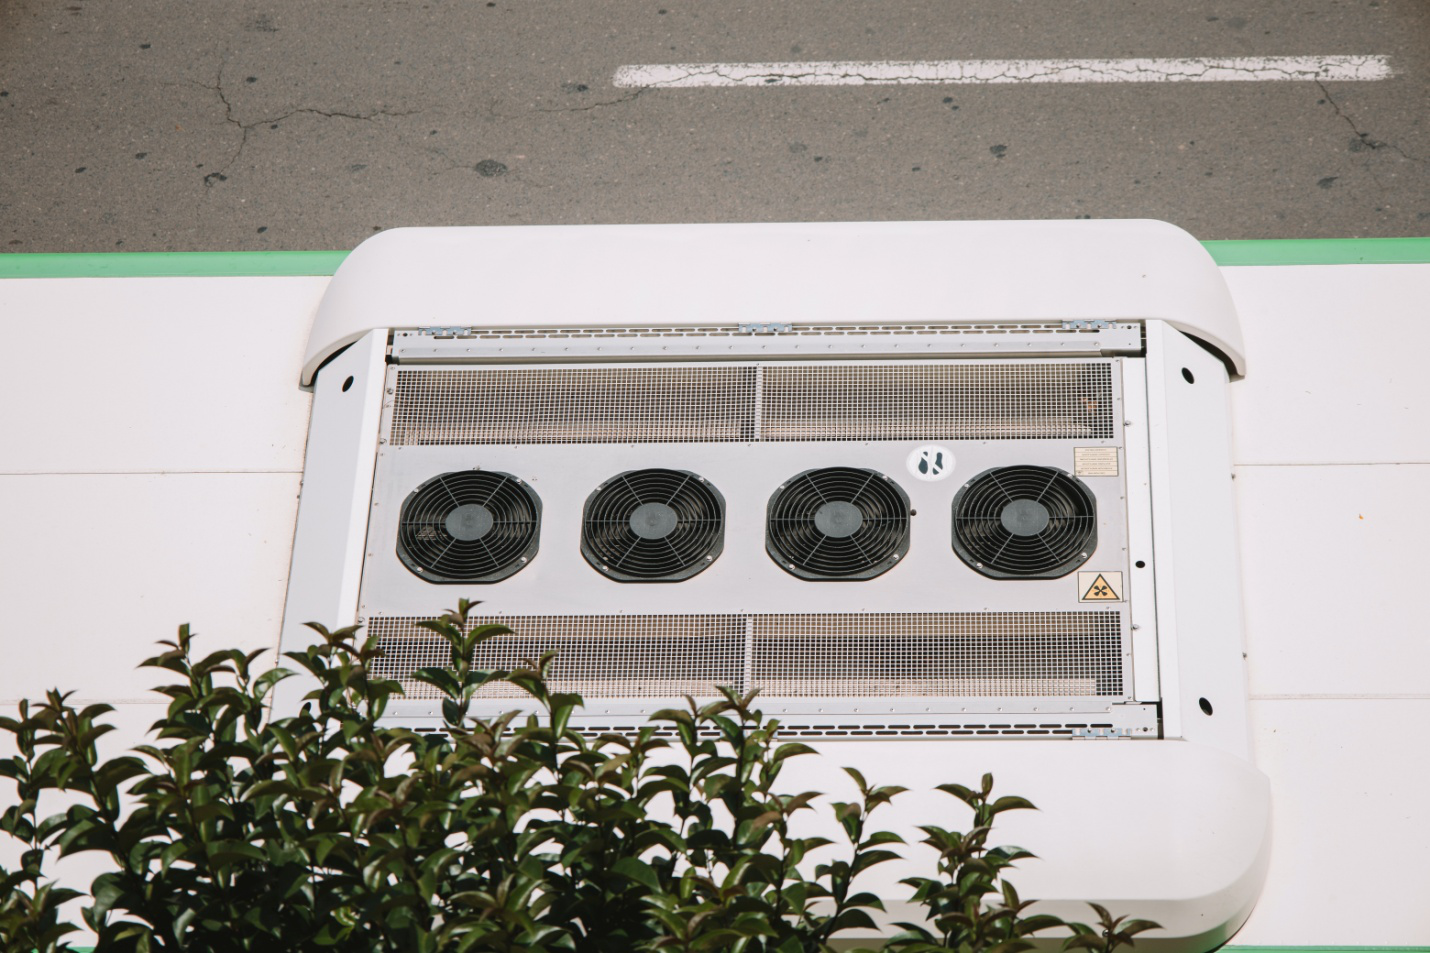 A large air conditioner mounted on a wall.